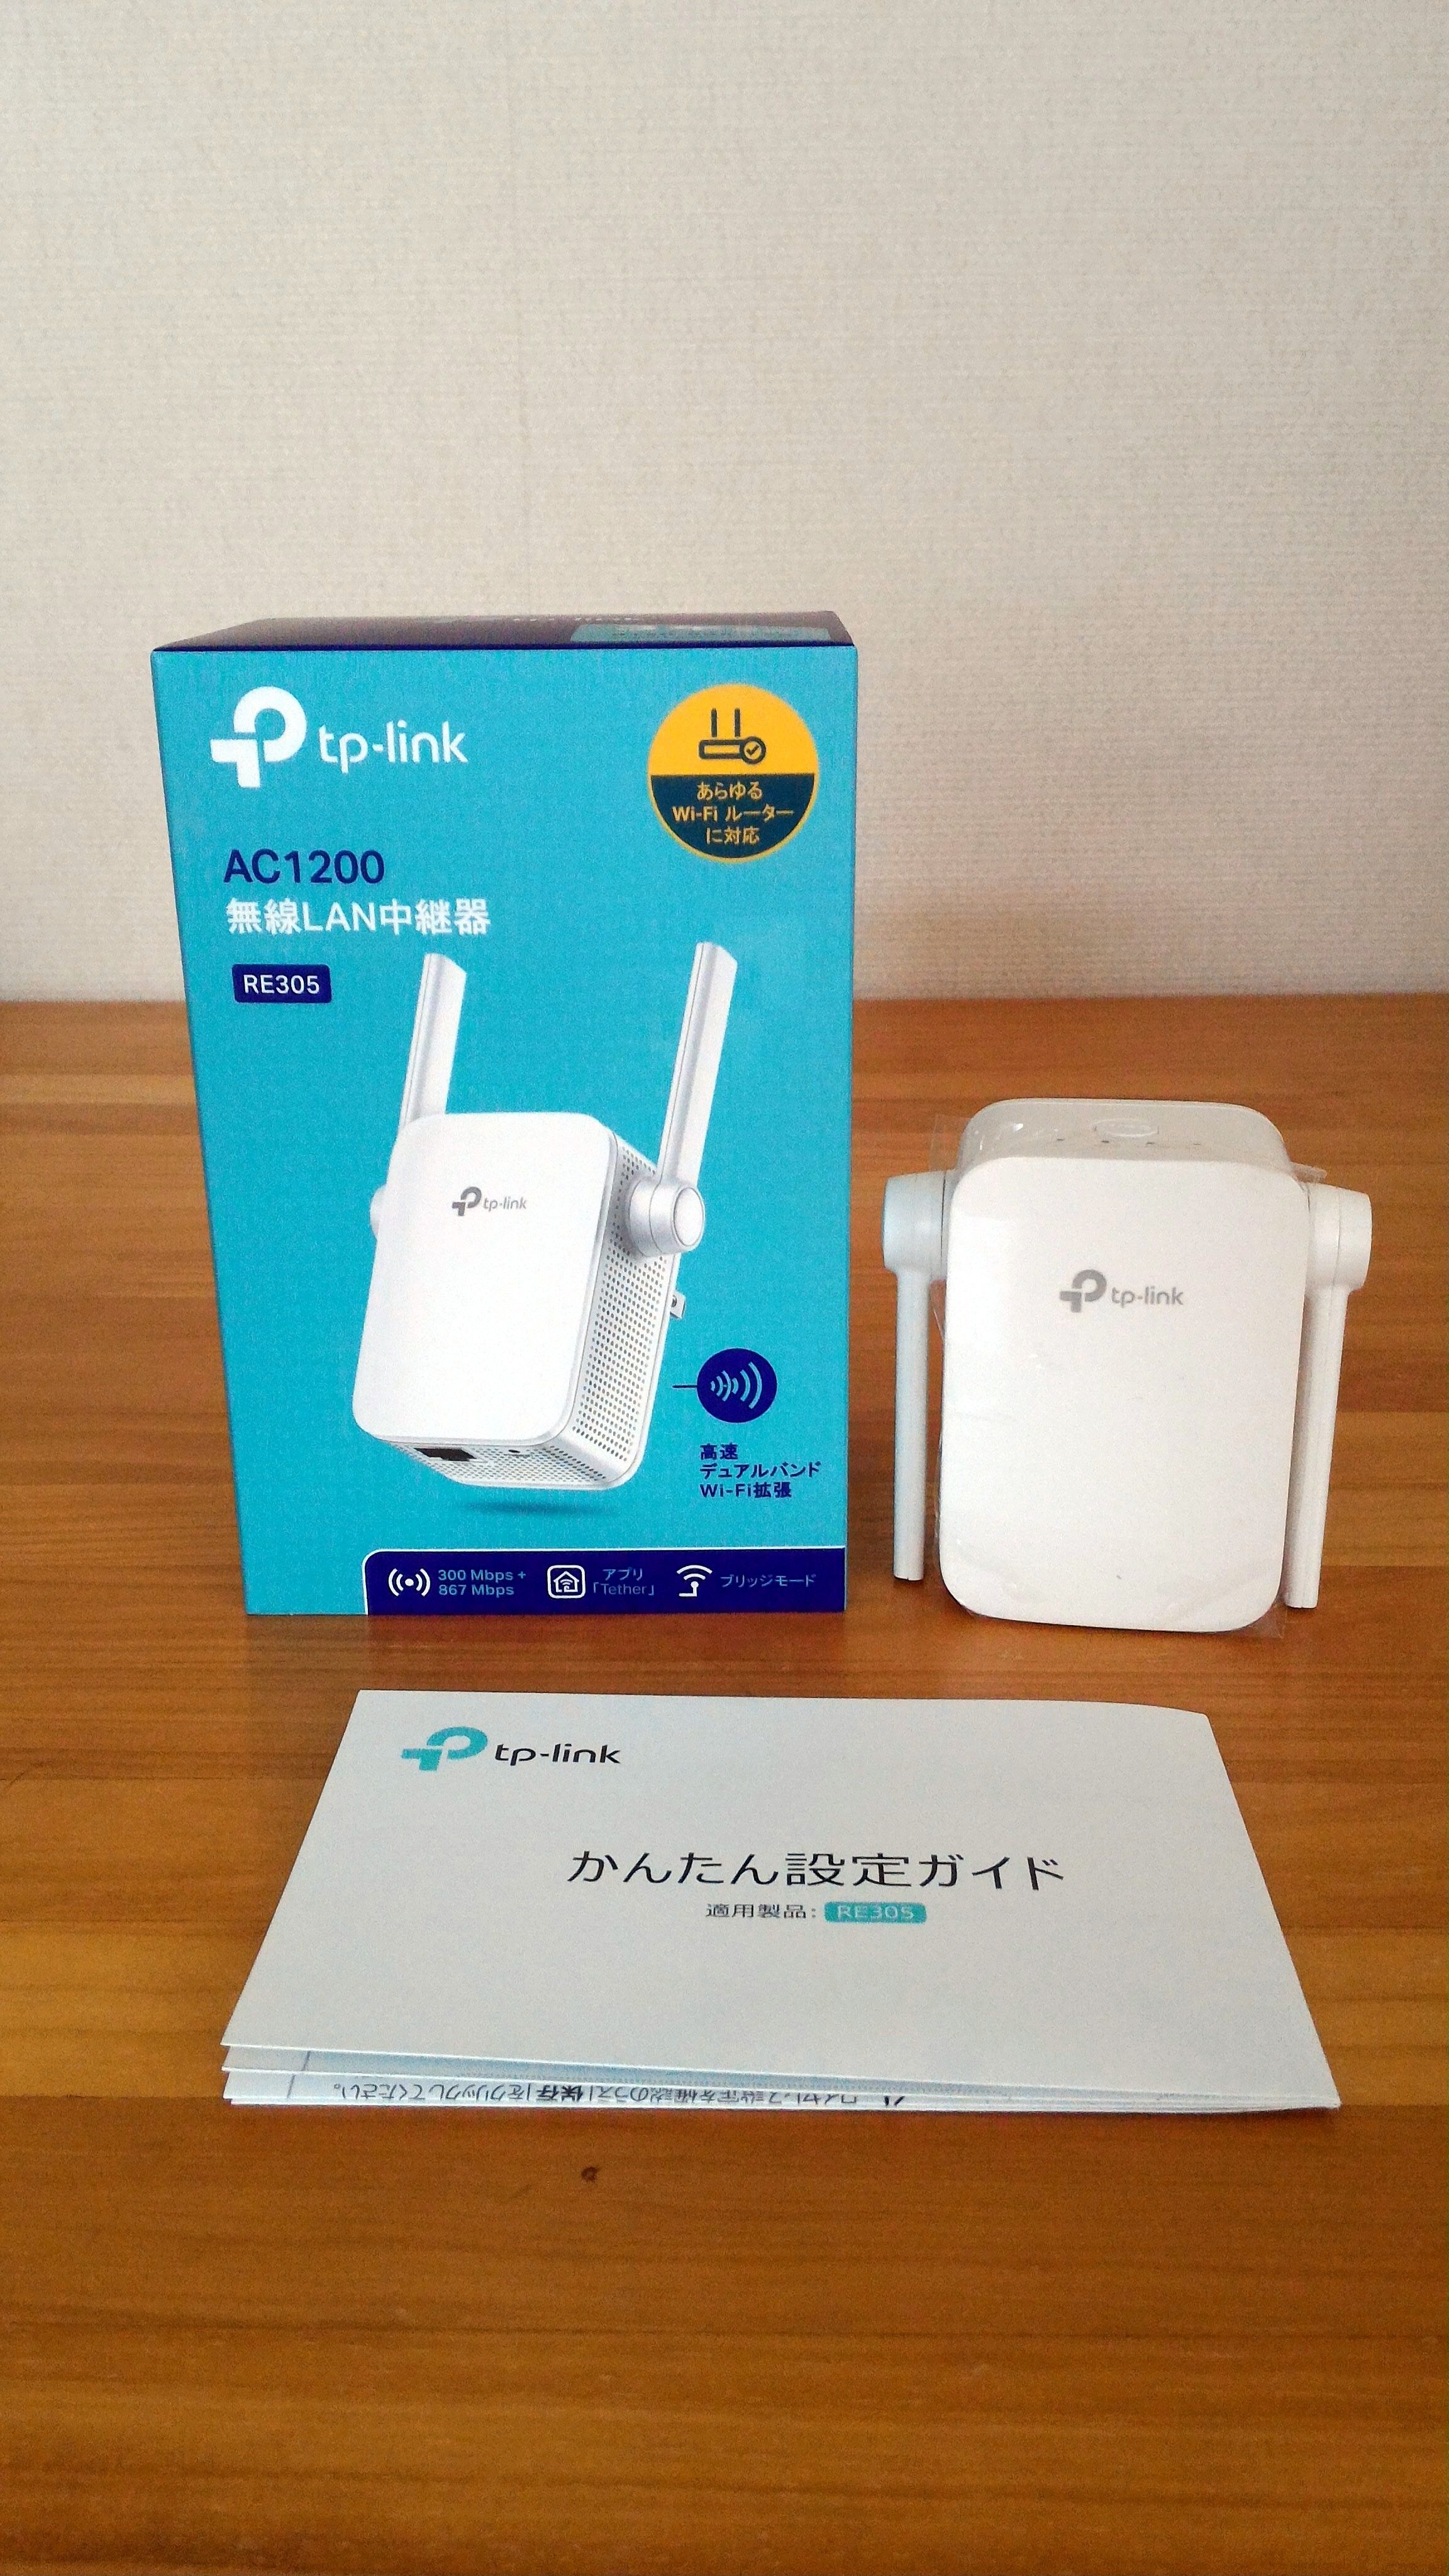 WiFi中継器買いました TP-Link RE305 AC1200 | ちょっとひといき - 楽天ブログ